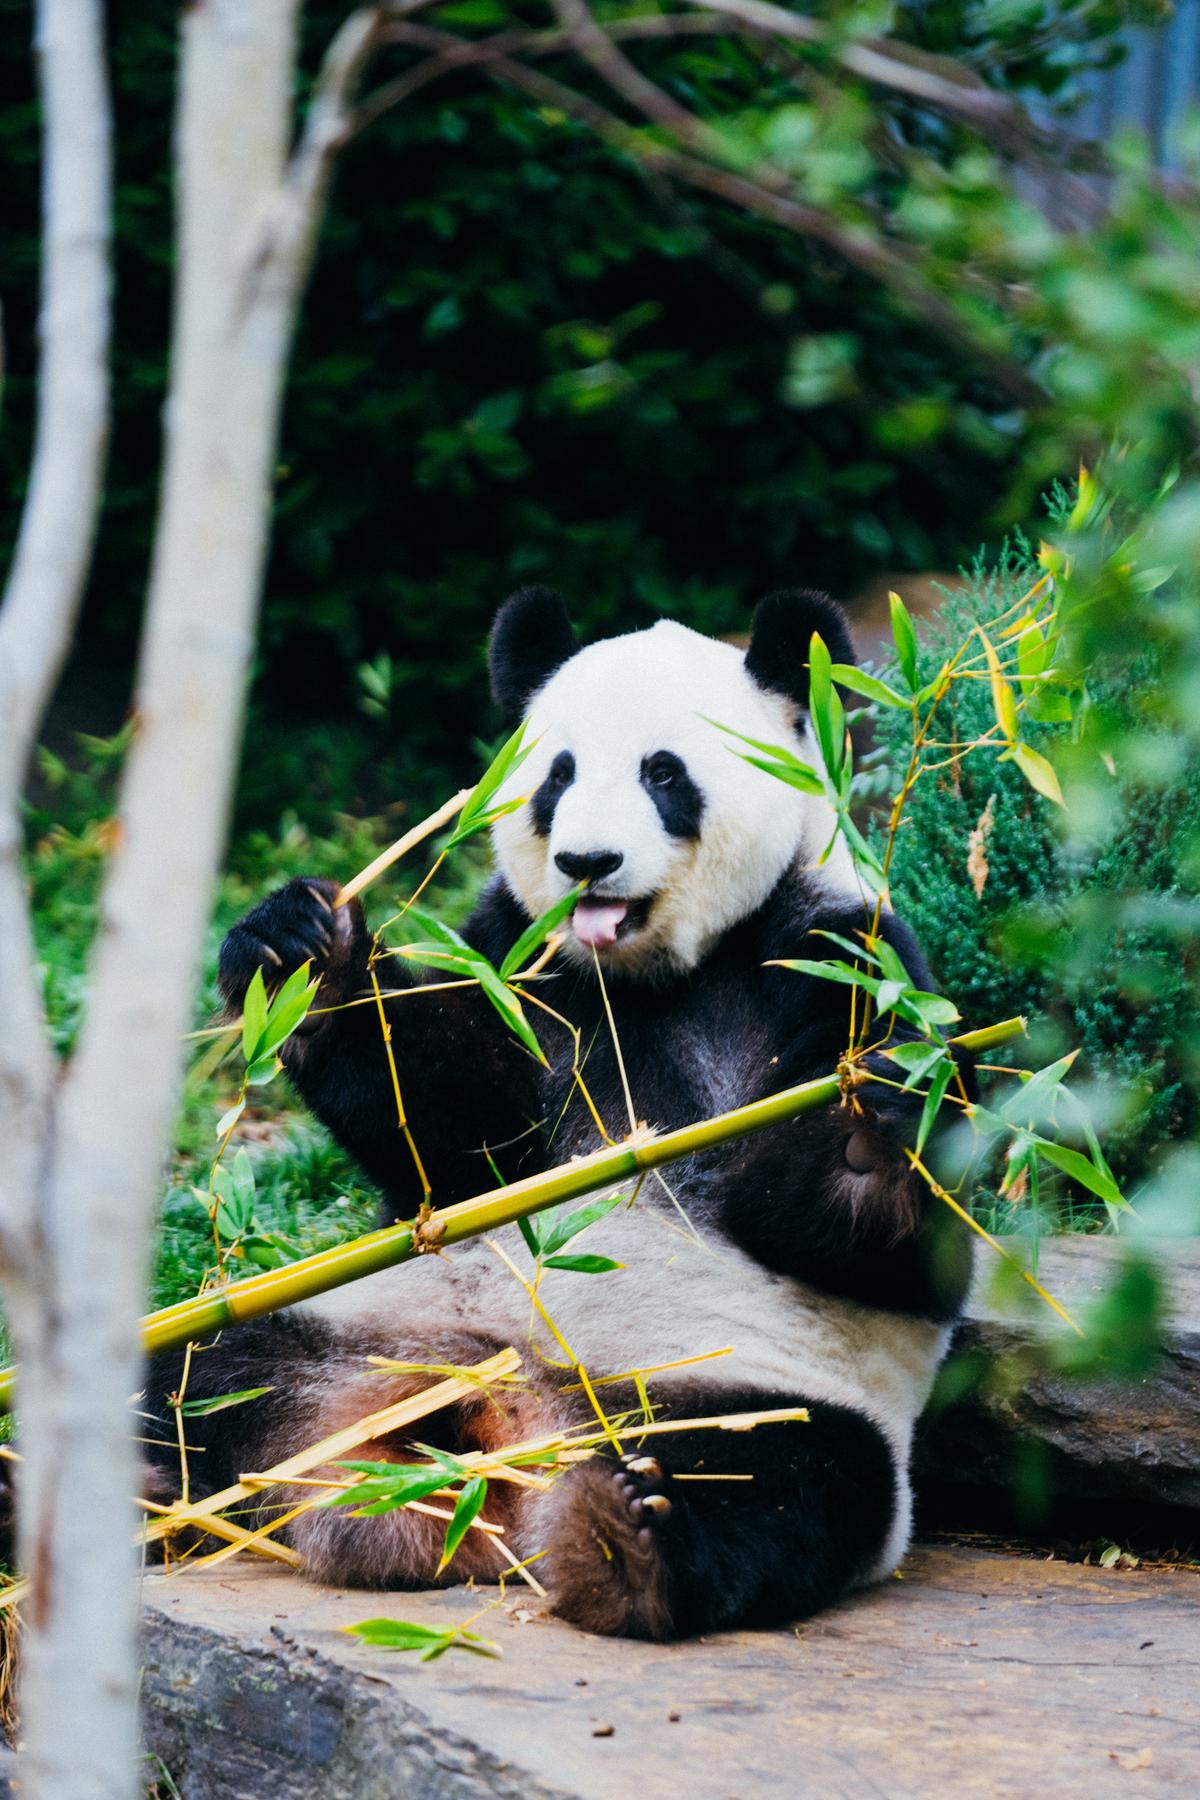 Image of a panda with bamboo, showcasing their unique dental characteristics.